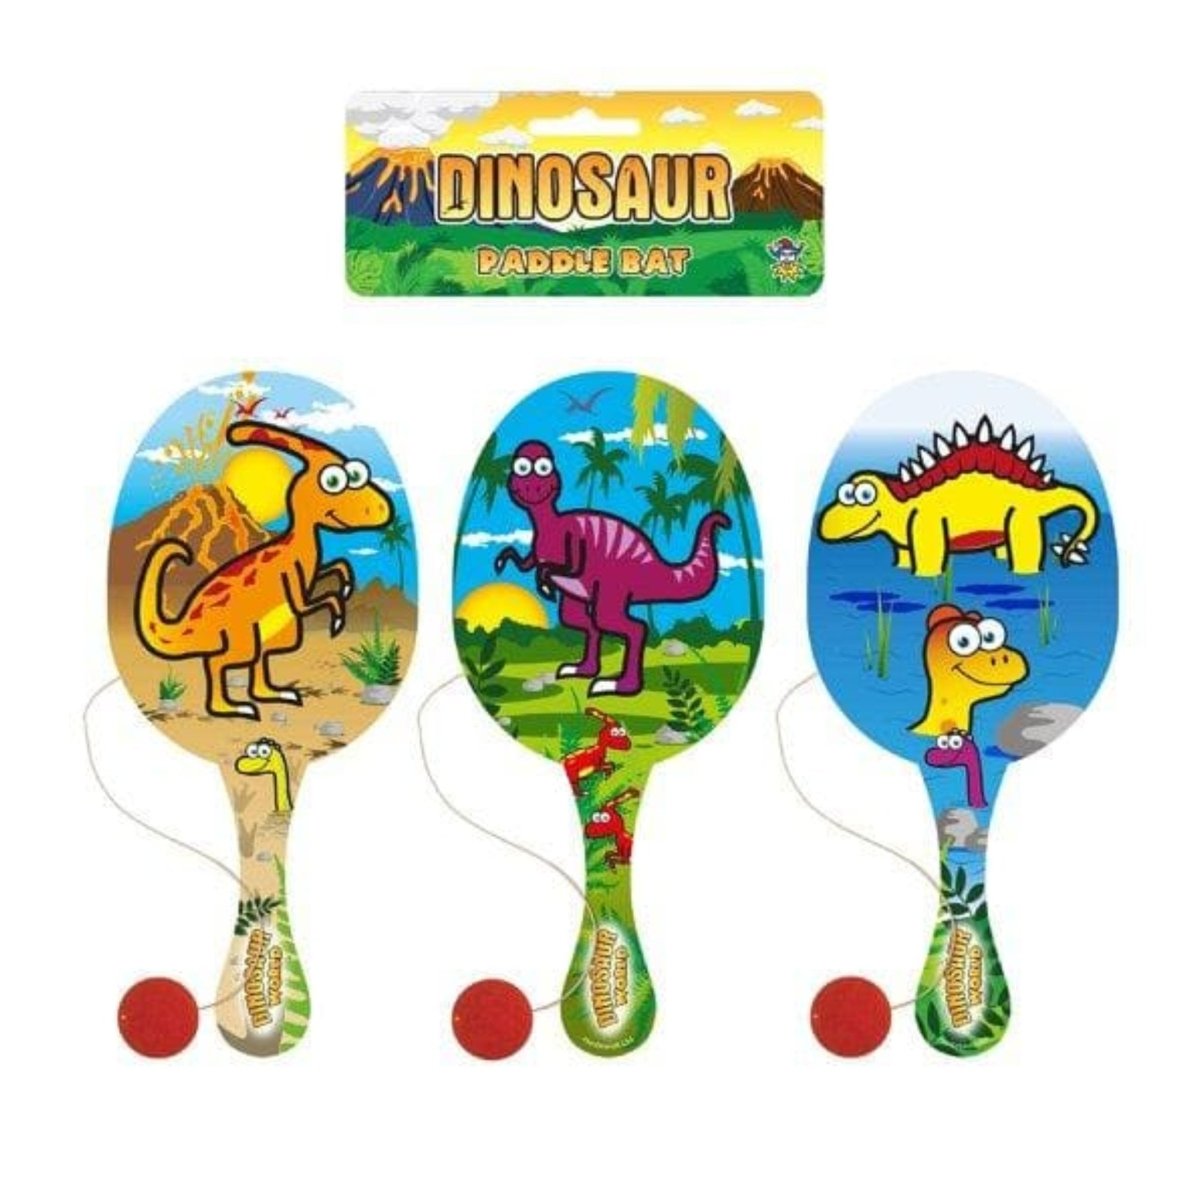 Dinosaur Wooden Paddle Bat and Ball Game - Kids Party Craft